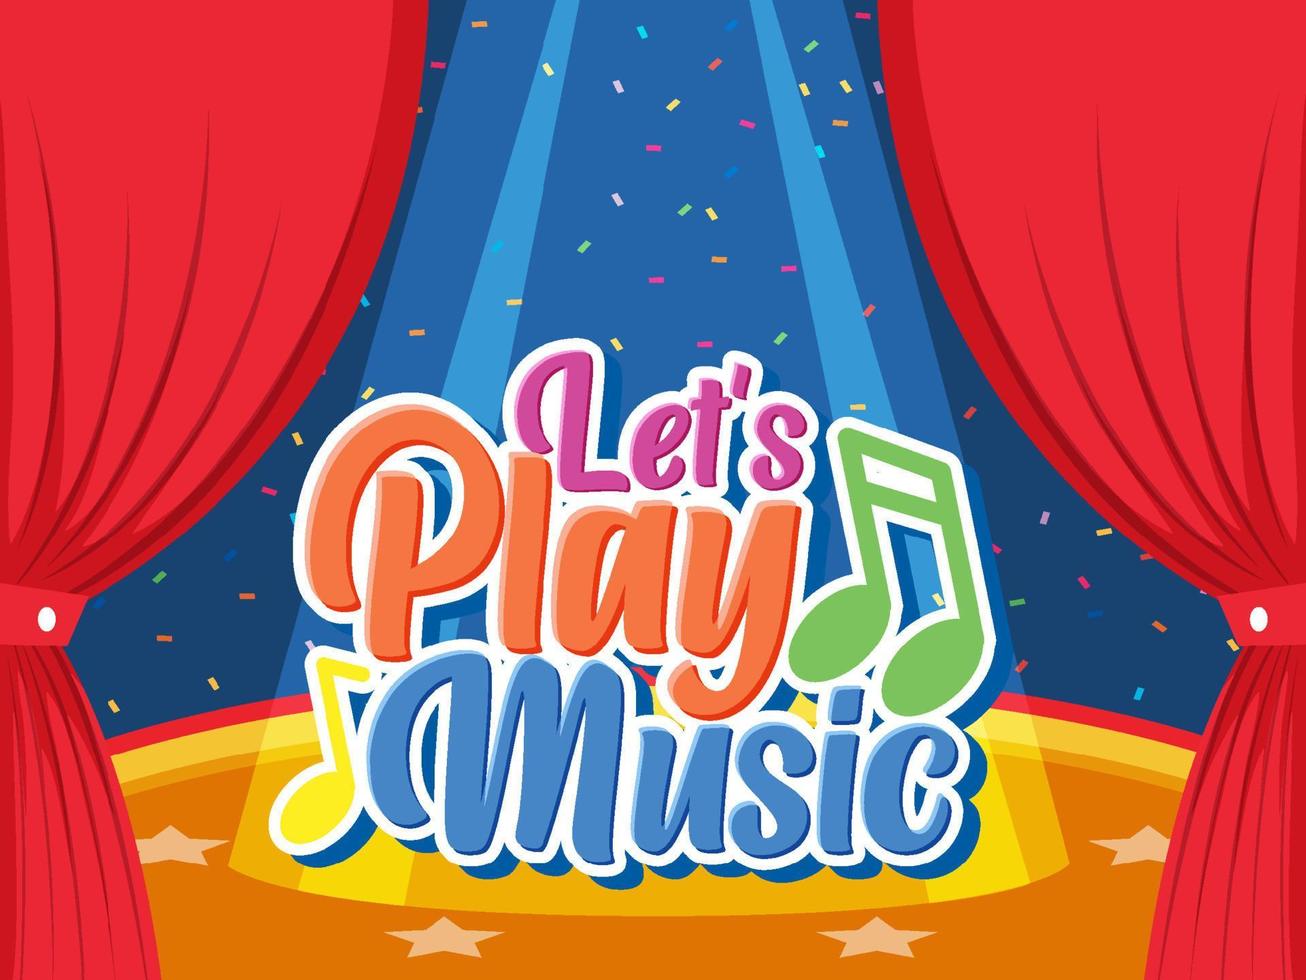 Lets play the music text with background template vector